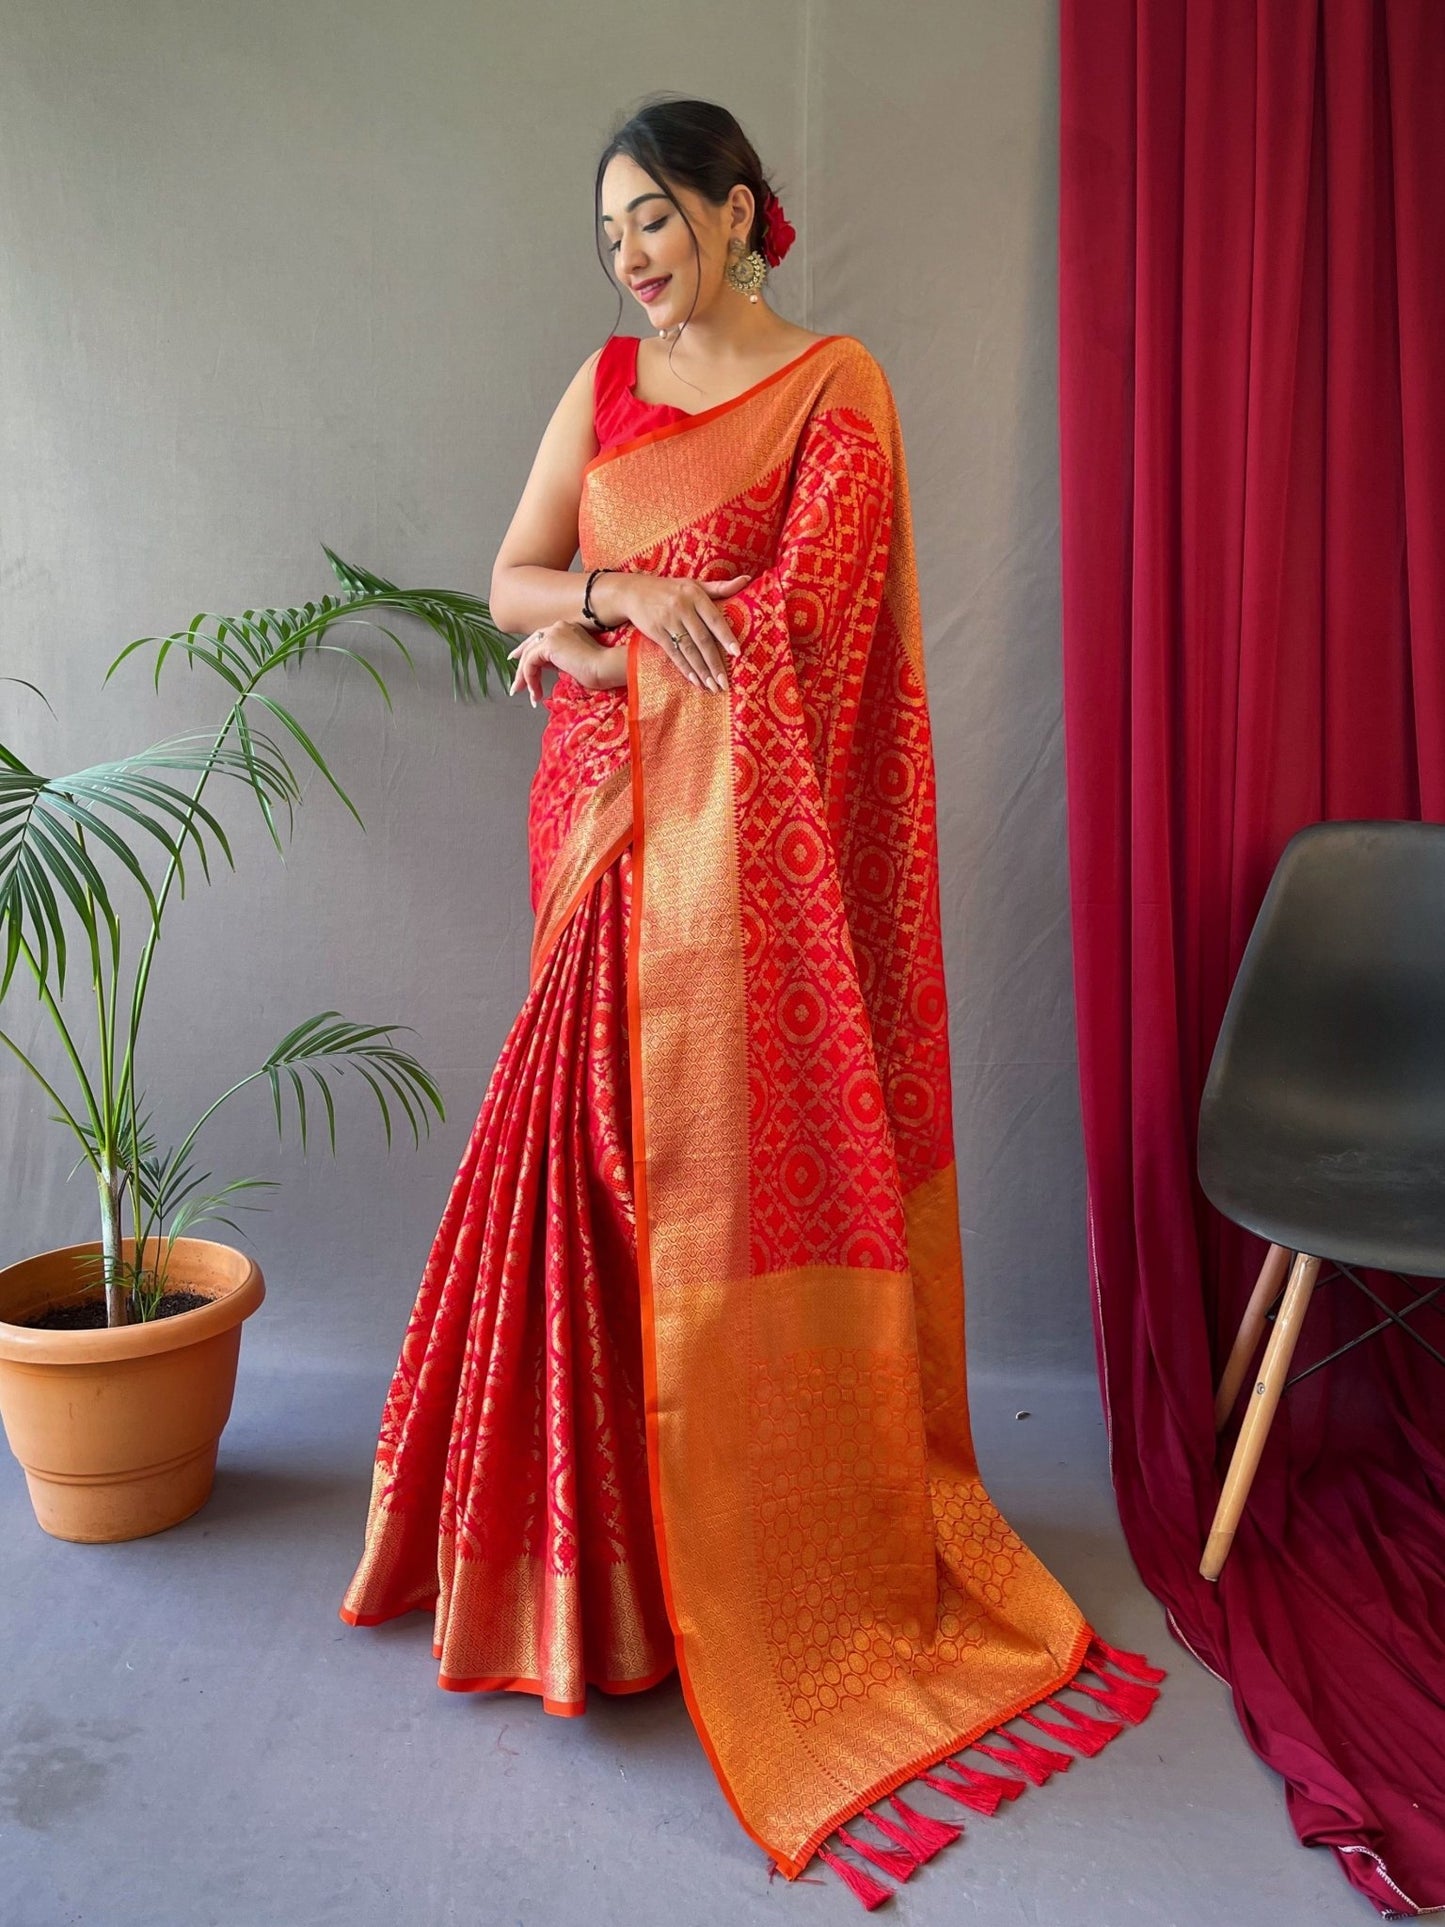 Patola Silk Woven Vol. 5 Contrast Red with Orange - TASARIKA INDIA